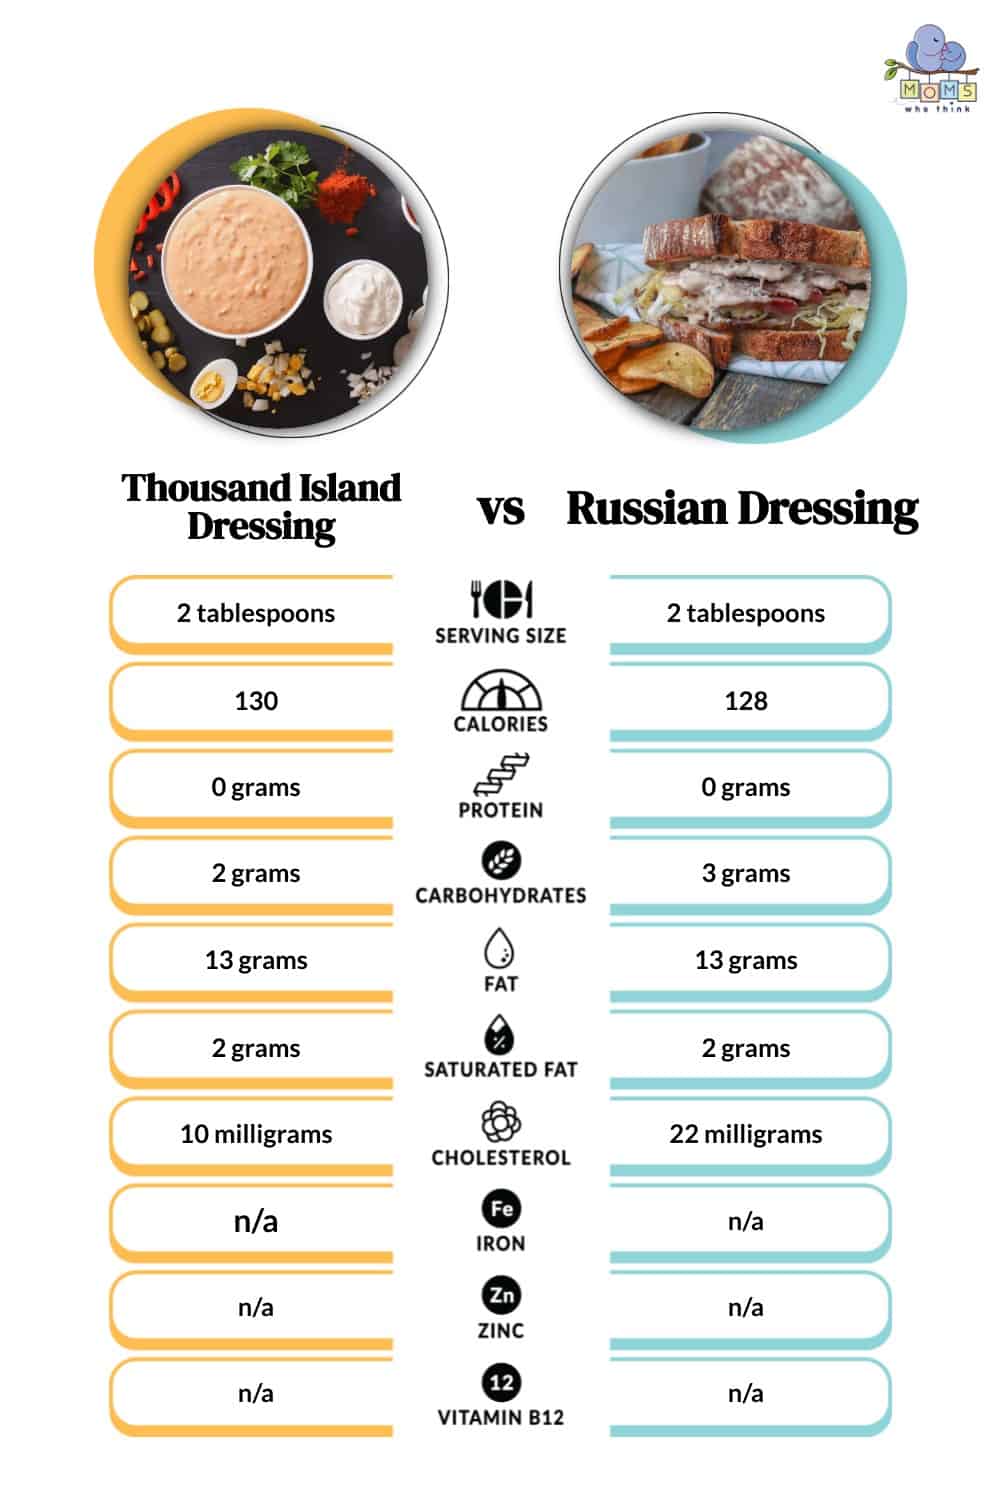 Thousand Island Dressing vs Russian Dressing Nutritional Facts